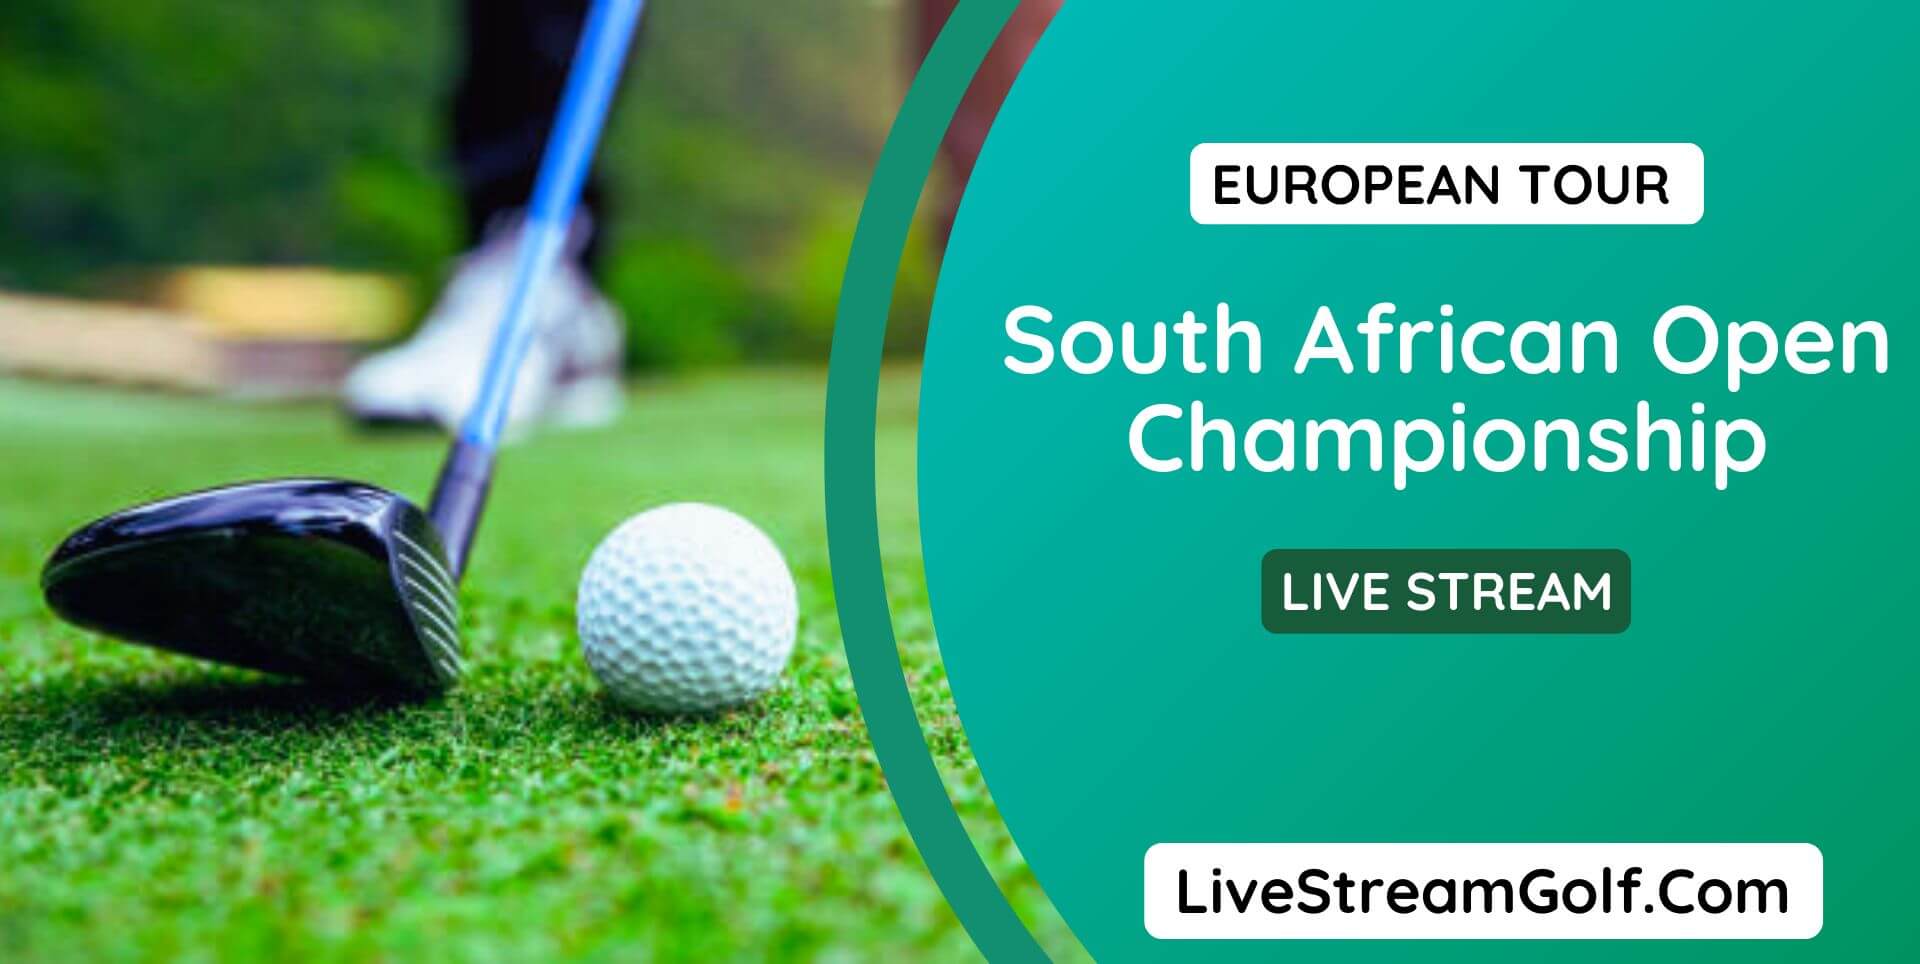 South African Open Day 2 Live Stream: European Tour 2022